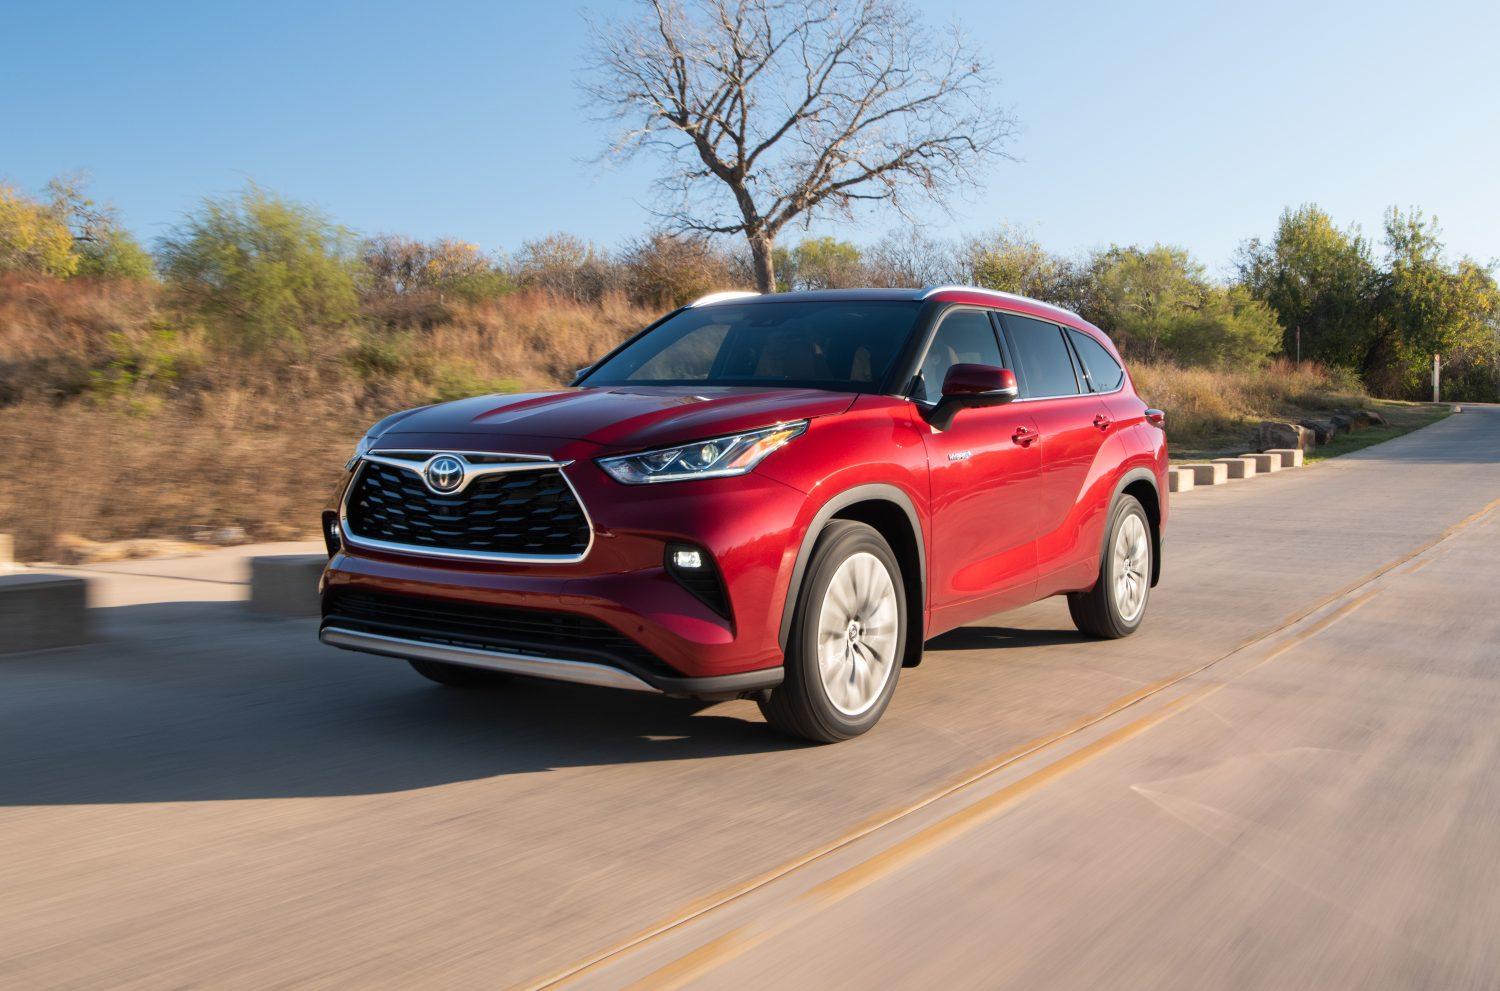 Toyota is known for having reliable vehicles, and their SUVs are some of the most popular. But every company has a few products that just don’t meet the standards.